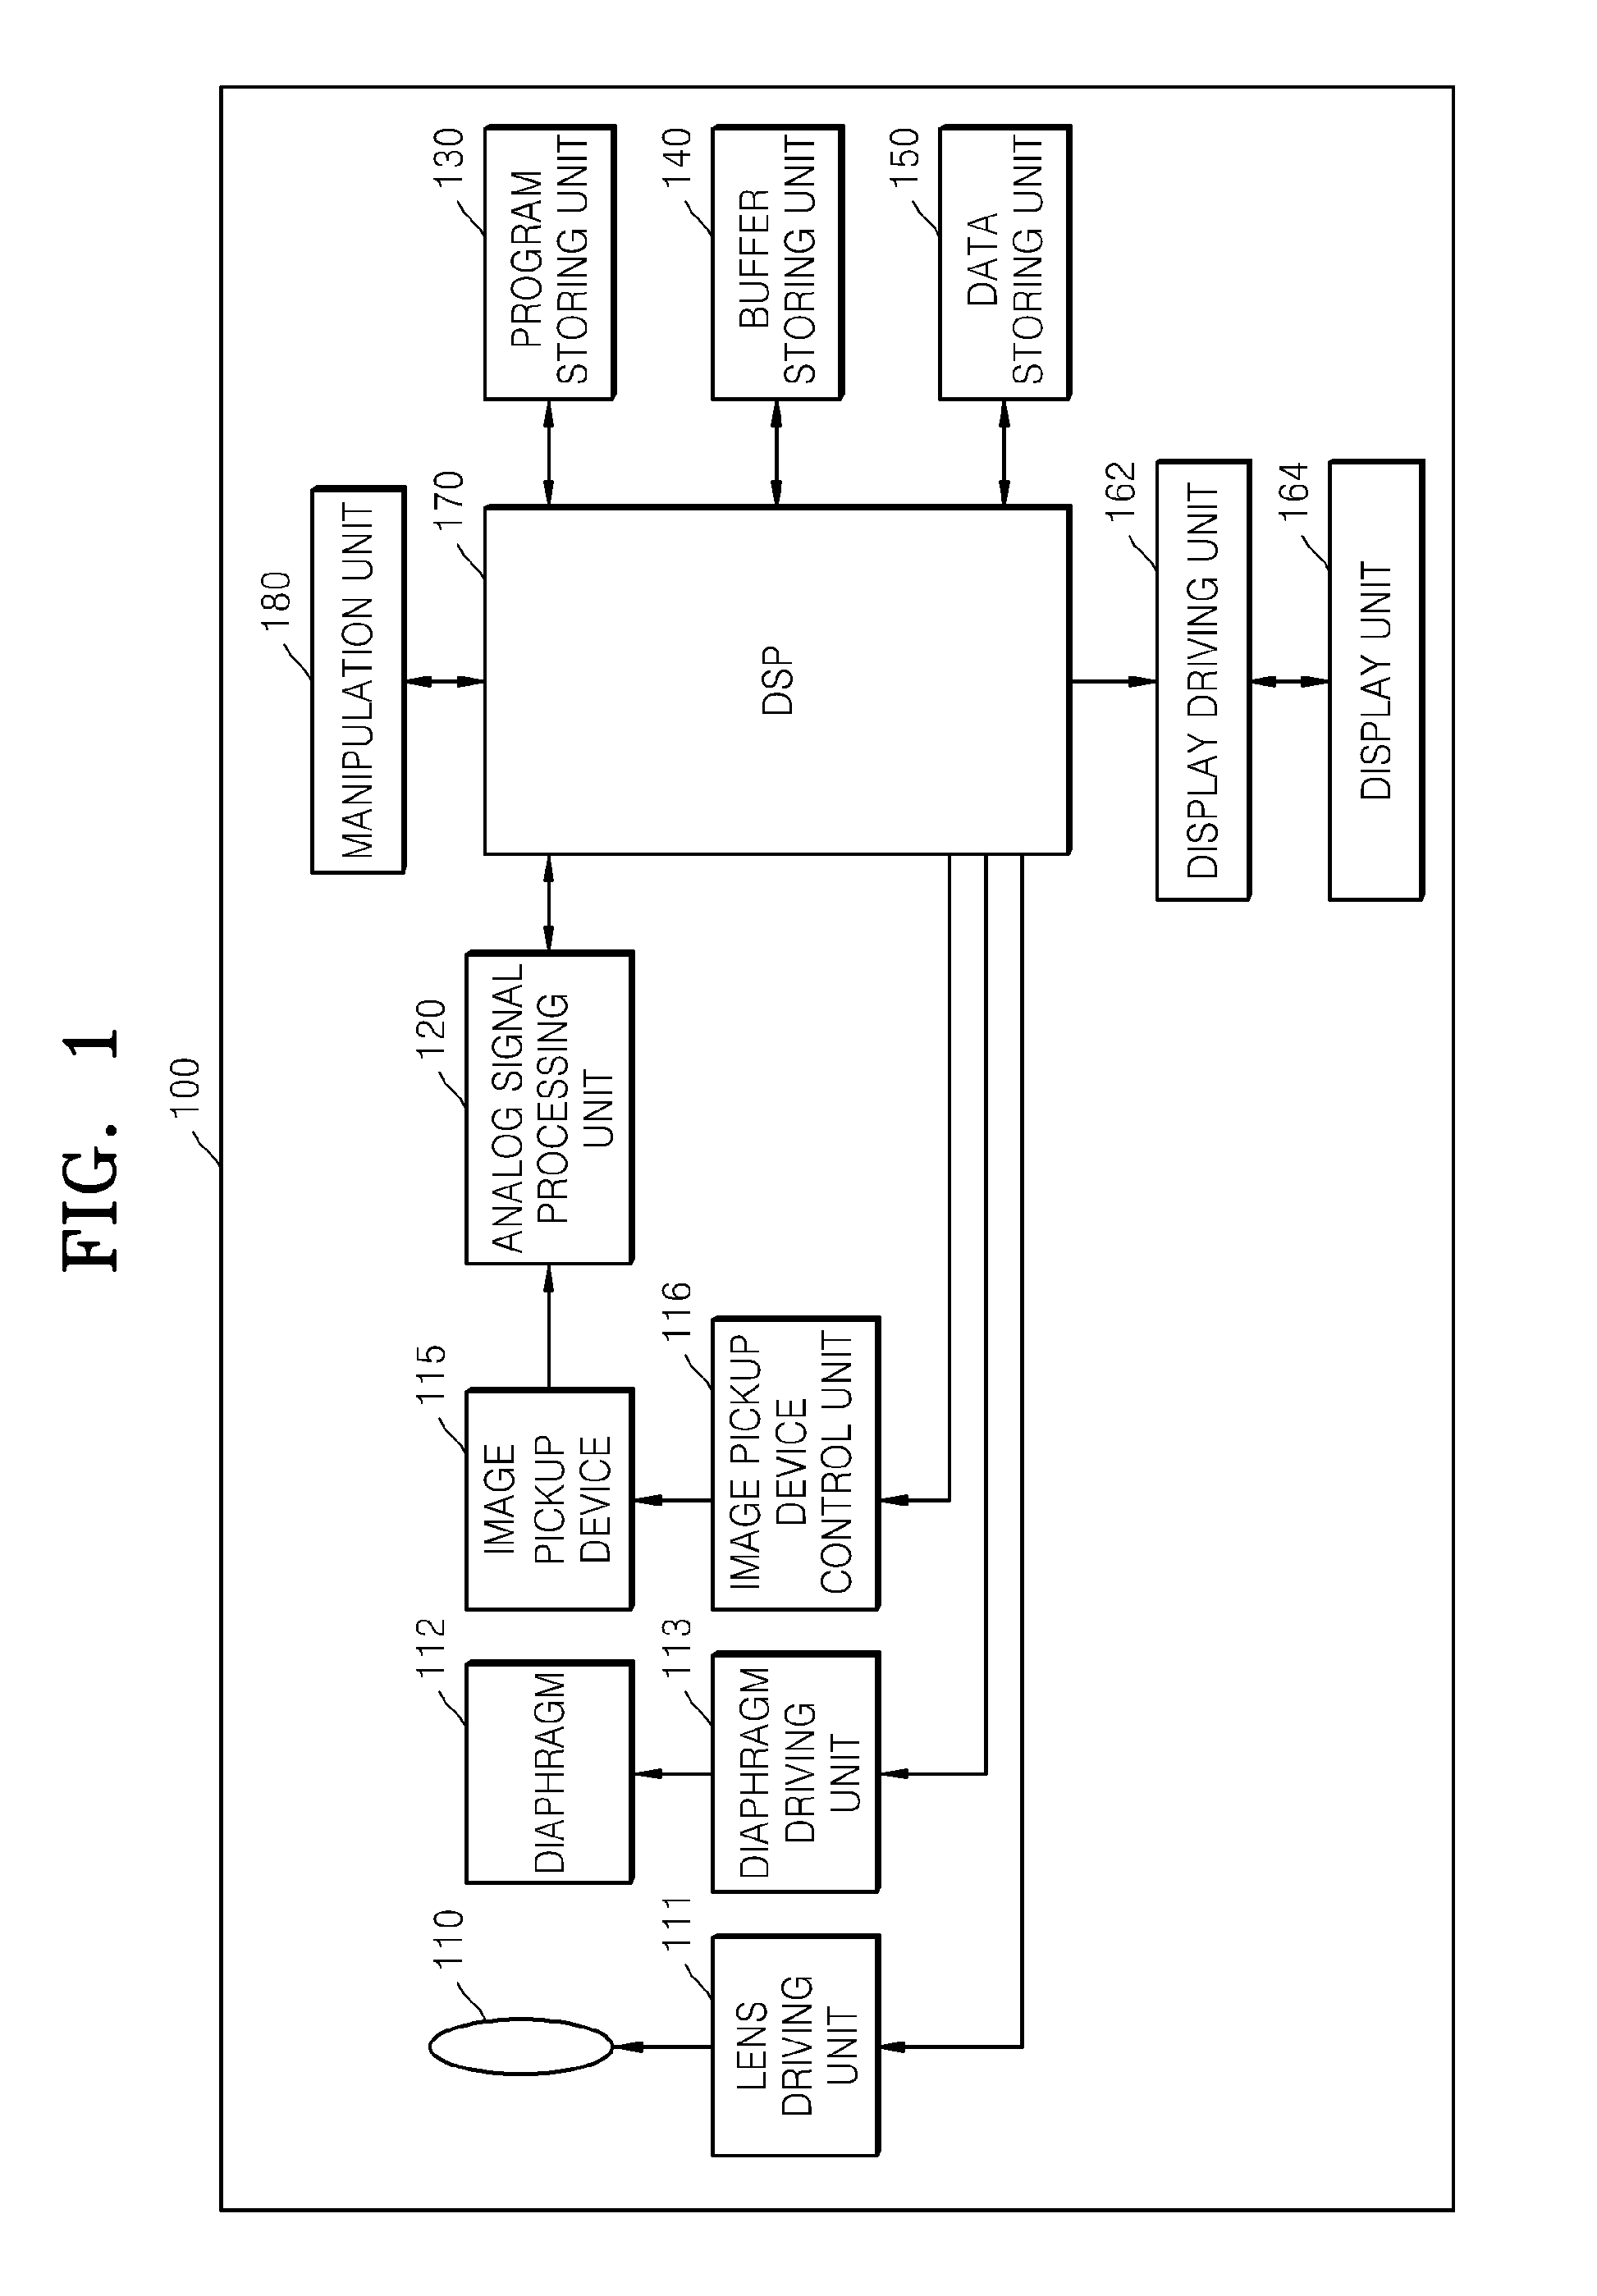 Digital Photographing Apparatus, Method for Controlling the Same, and Computer-Readable Medium